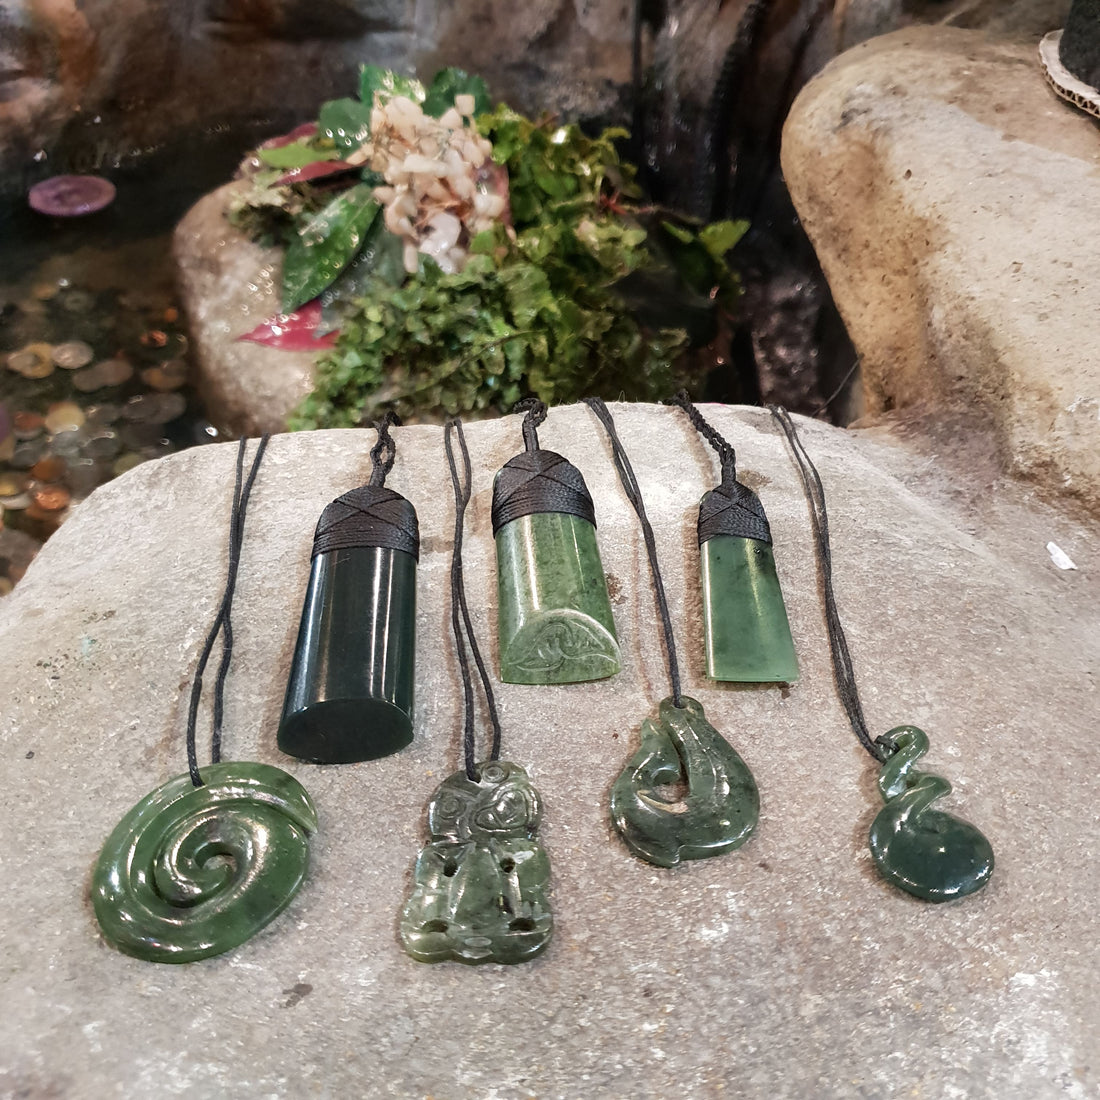 The Meanings of Different New Zealand Greenstone Shapes